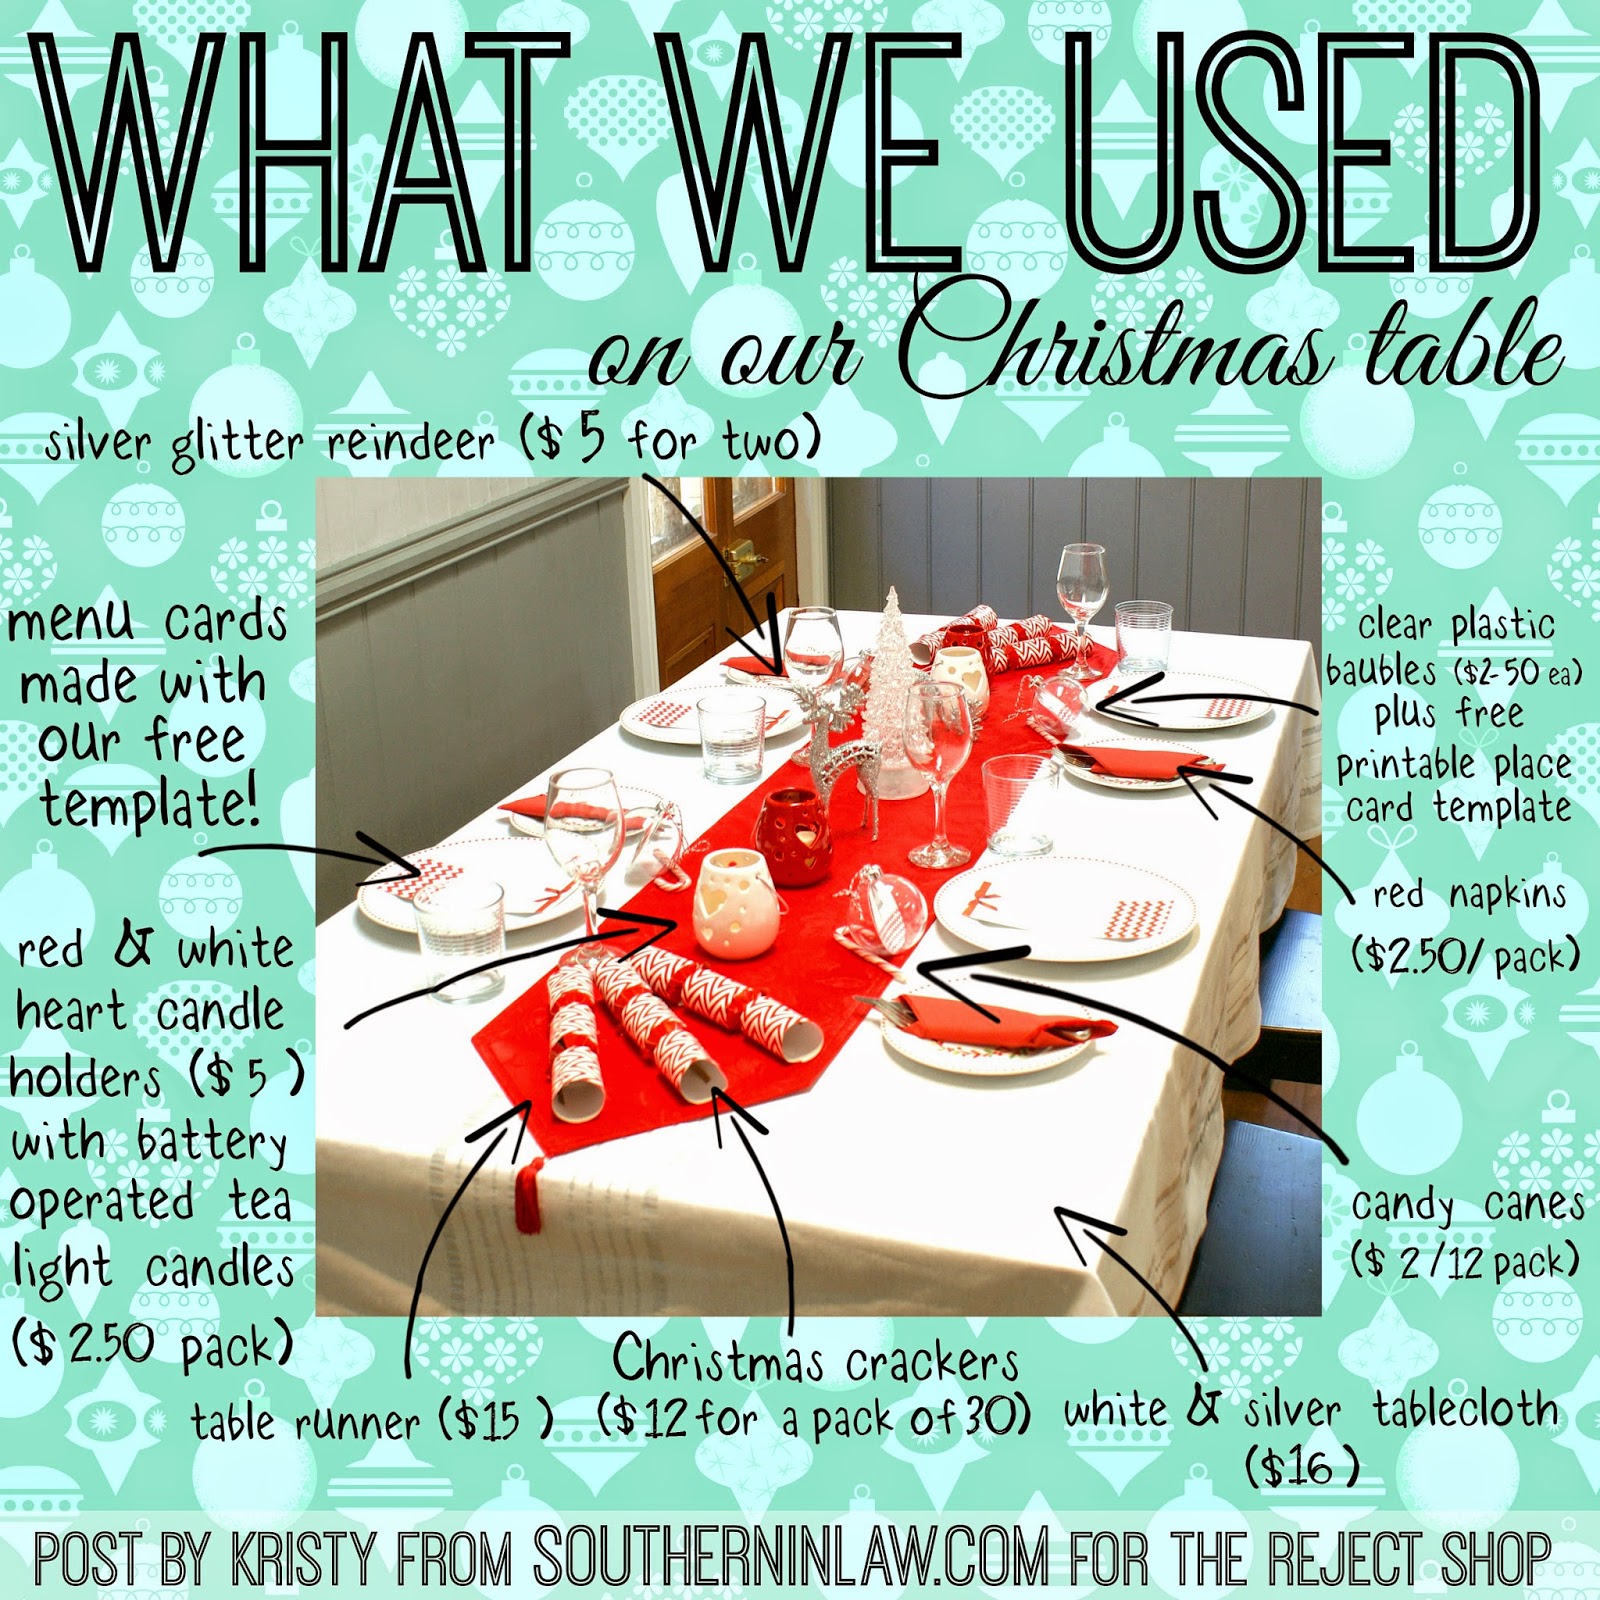 Tips and Ideas for Decorating Your Christmas Table on a Budget - Free Christmas Menu Cards and Place Card Printables